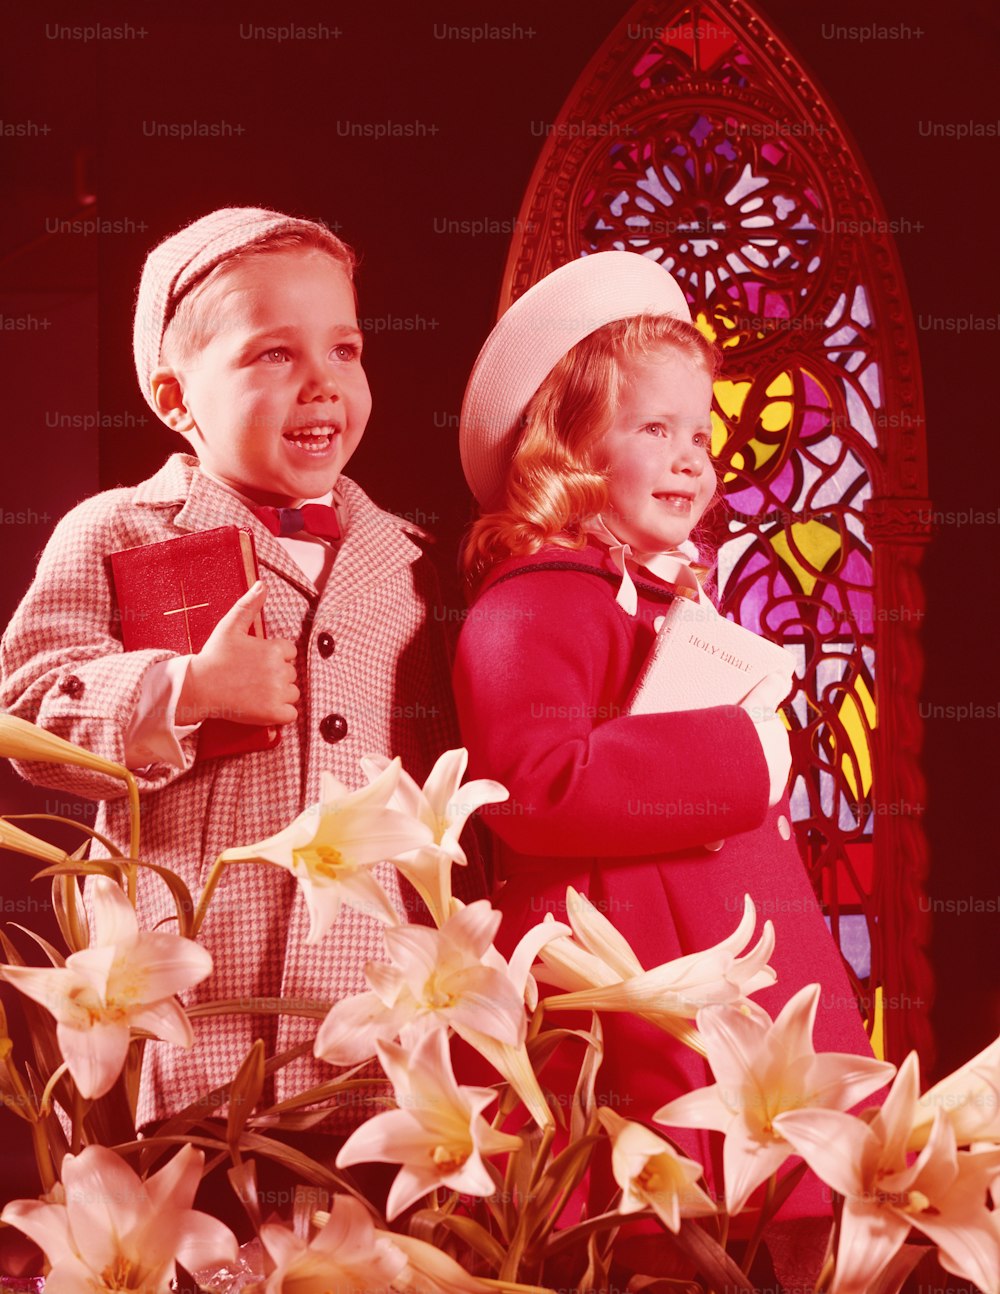 UNITED STATES - CIRCA 1960s:  Girl and boy in Sunday best, standing in front of stained glass window, lilies in foreground.